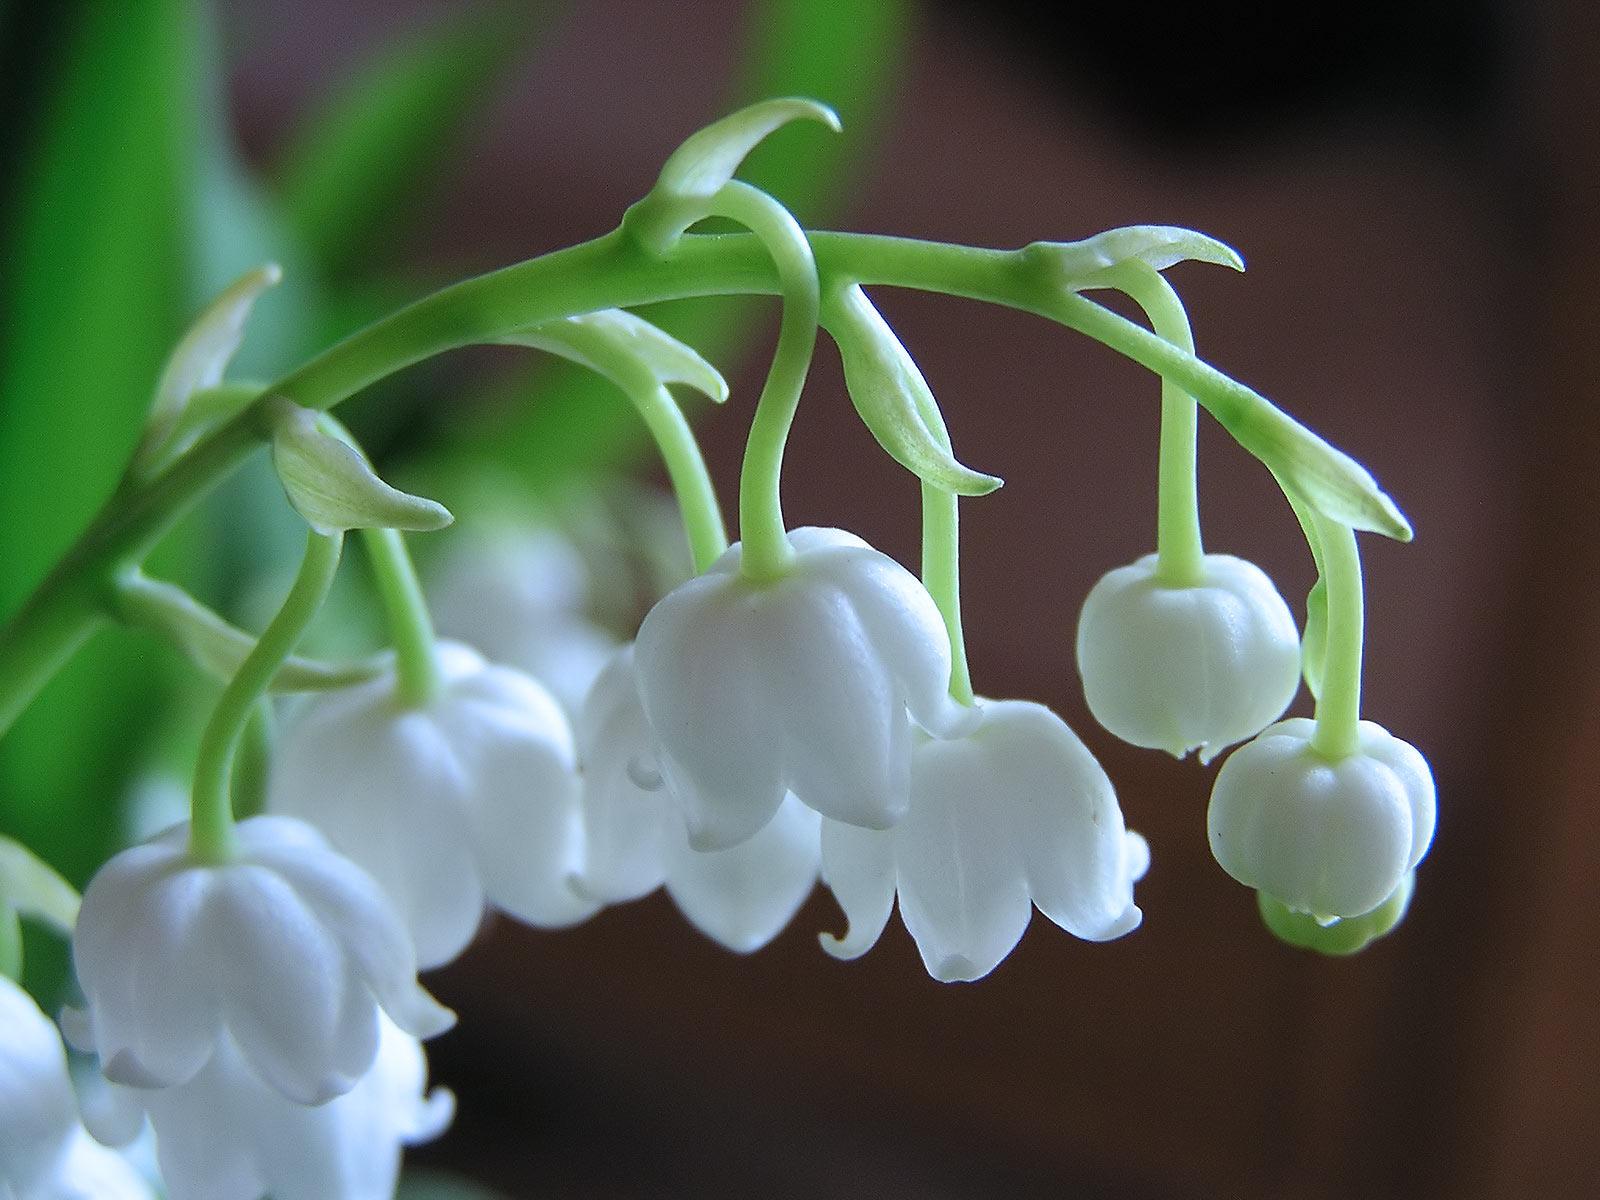 Pix. > 1600x Delicate Lily of the valley. jpeg v.6.3 wallpaper